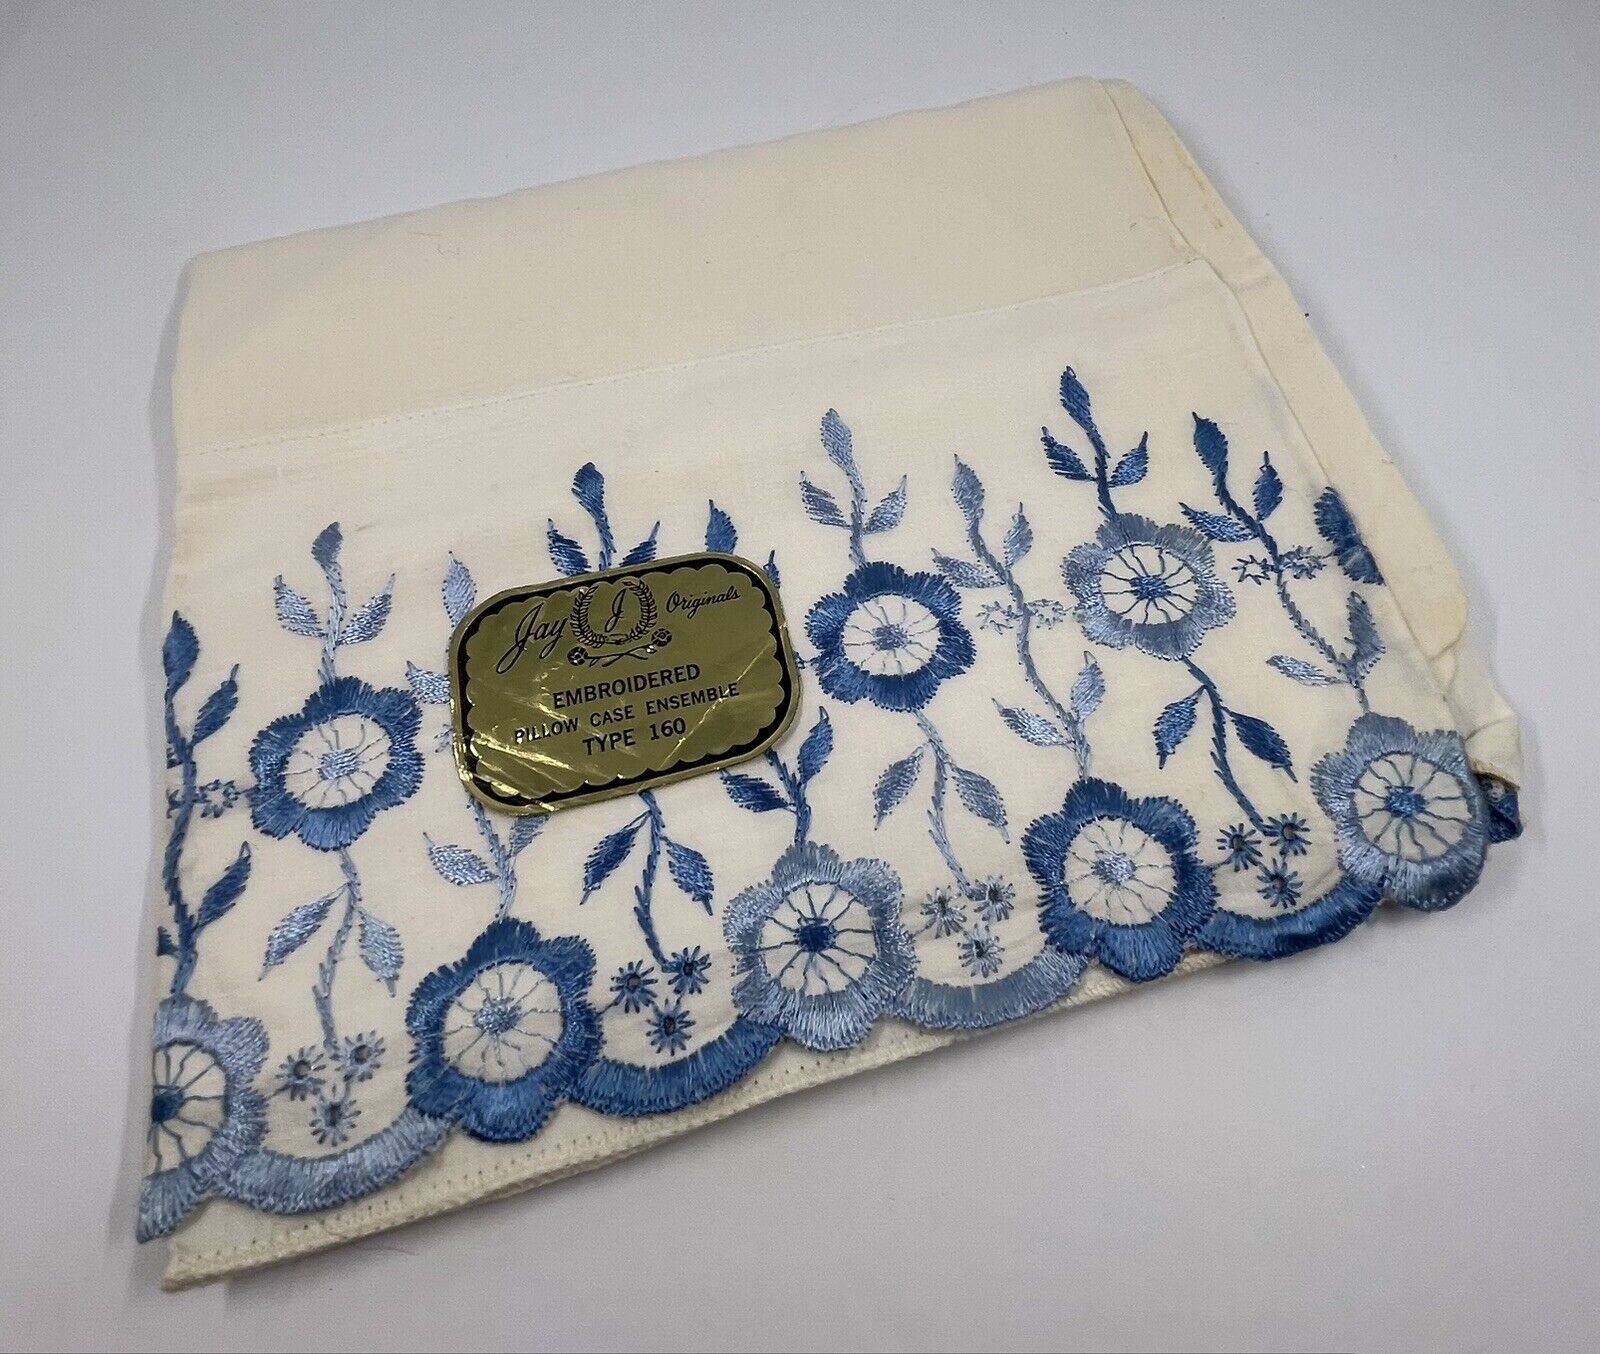 Vintage 1960s Jay Franco Pillow Case Std Size White Blue Embroidered Floral